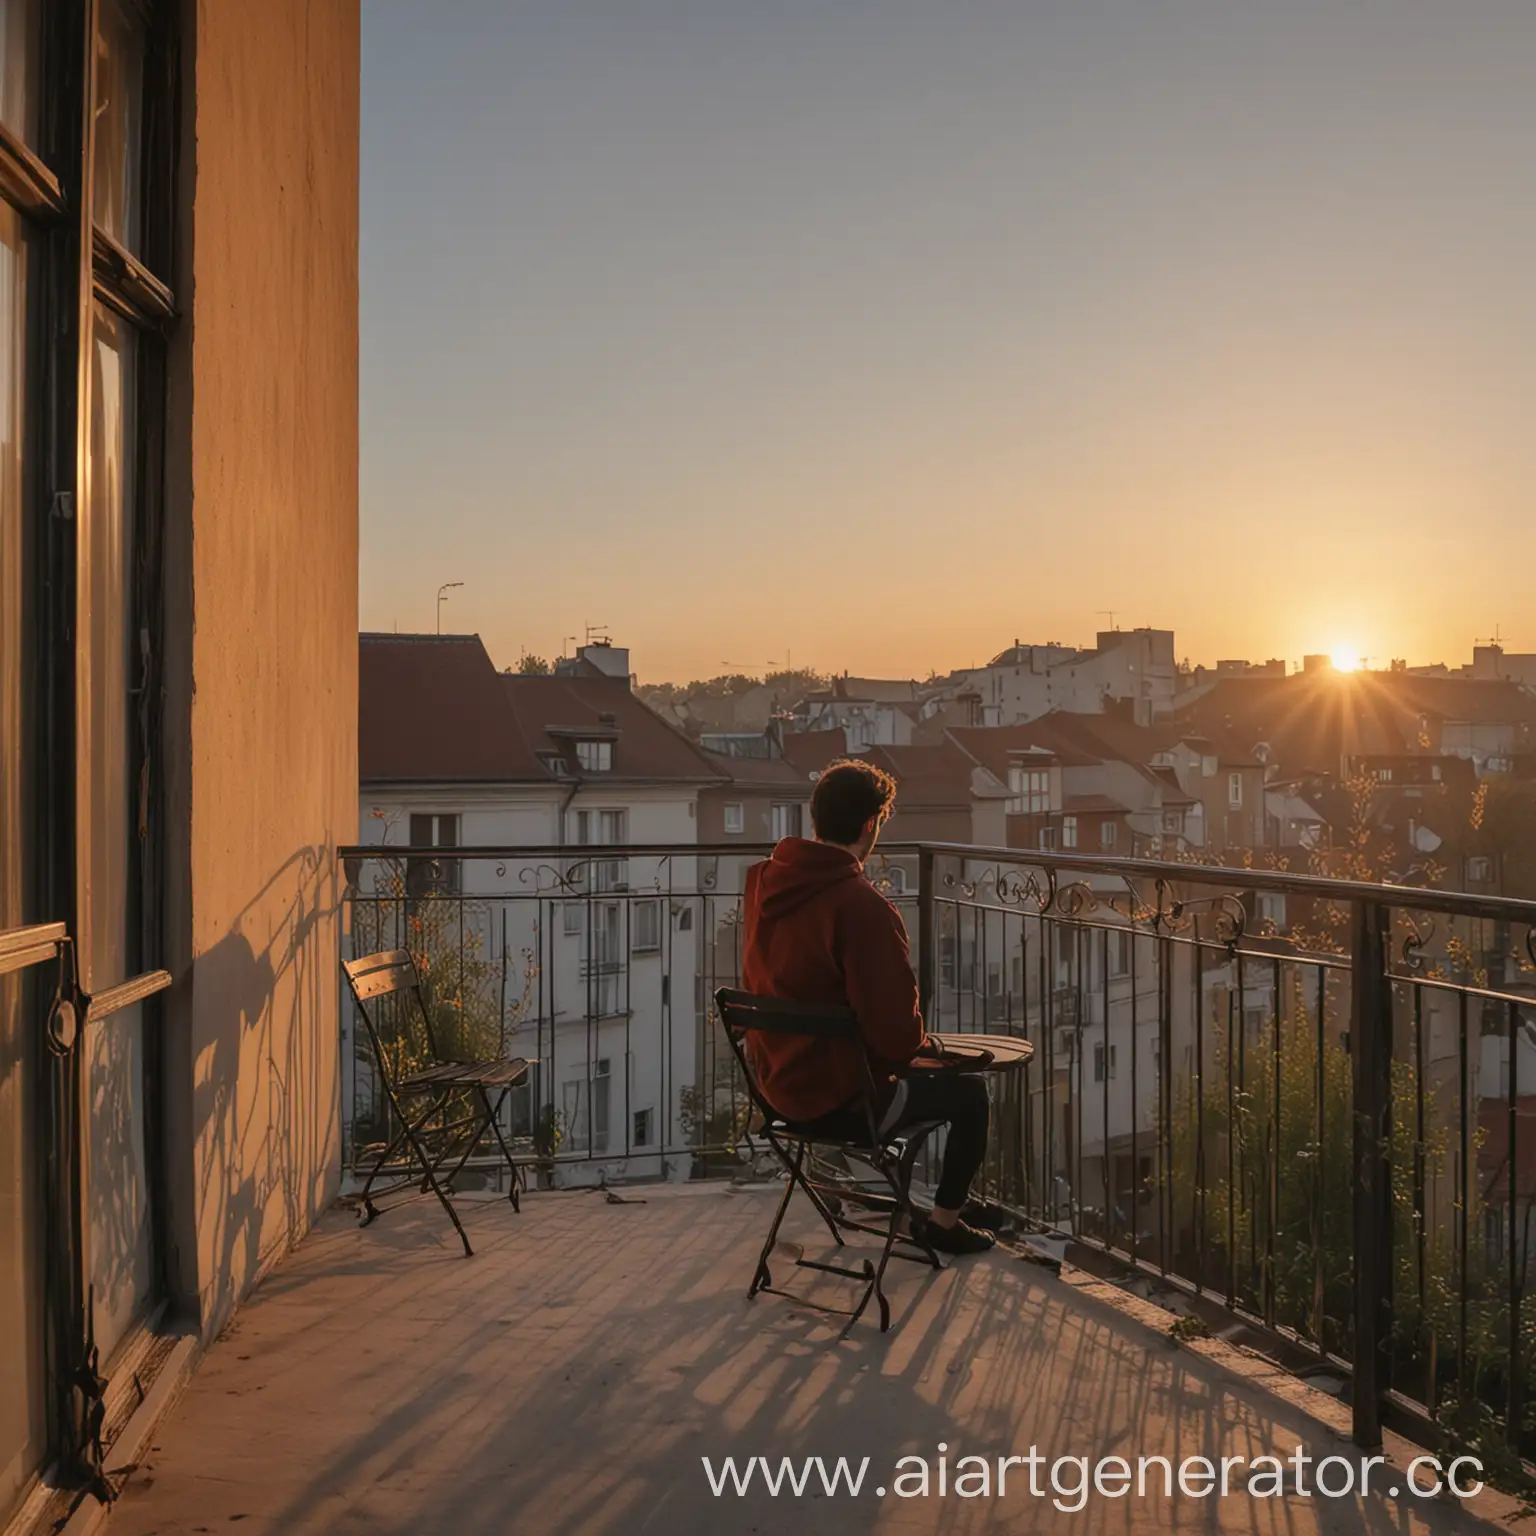 Solitude-on-Balcony-Contemplating-Late-Spring-Dawn